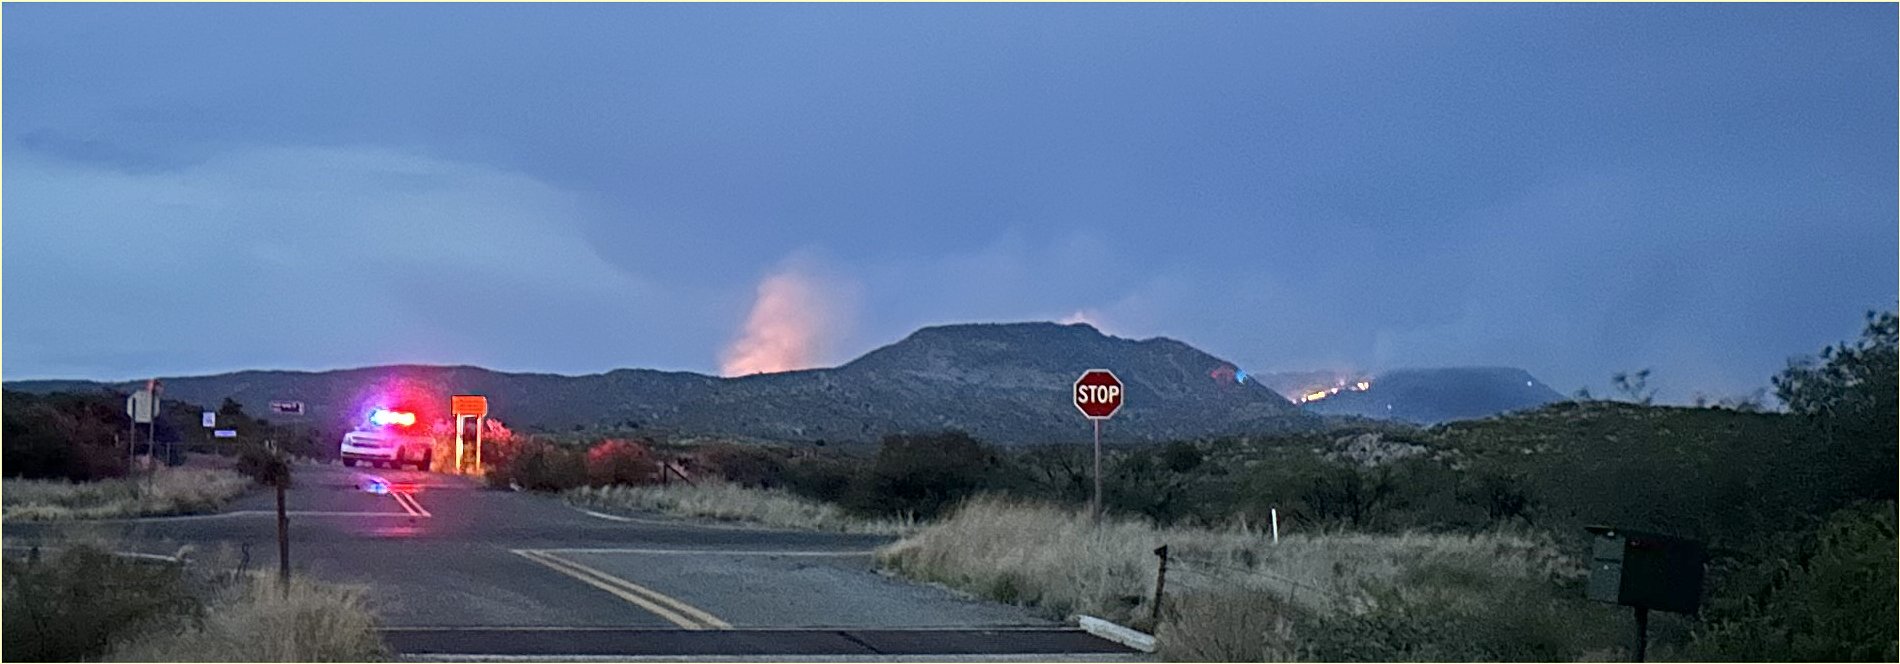 Racetrack and Grapevine fires viewed from Hwy. 169 east of Cherry